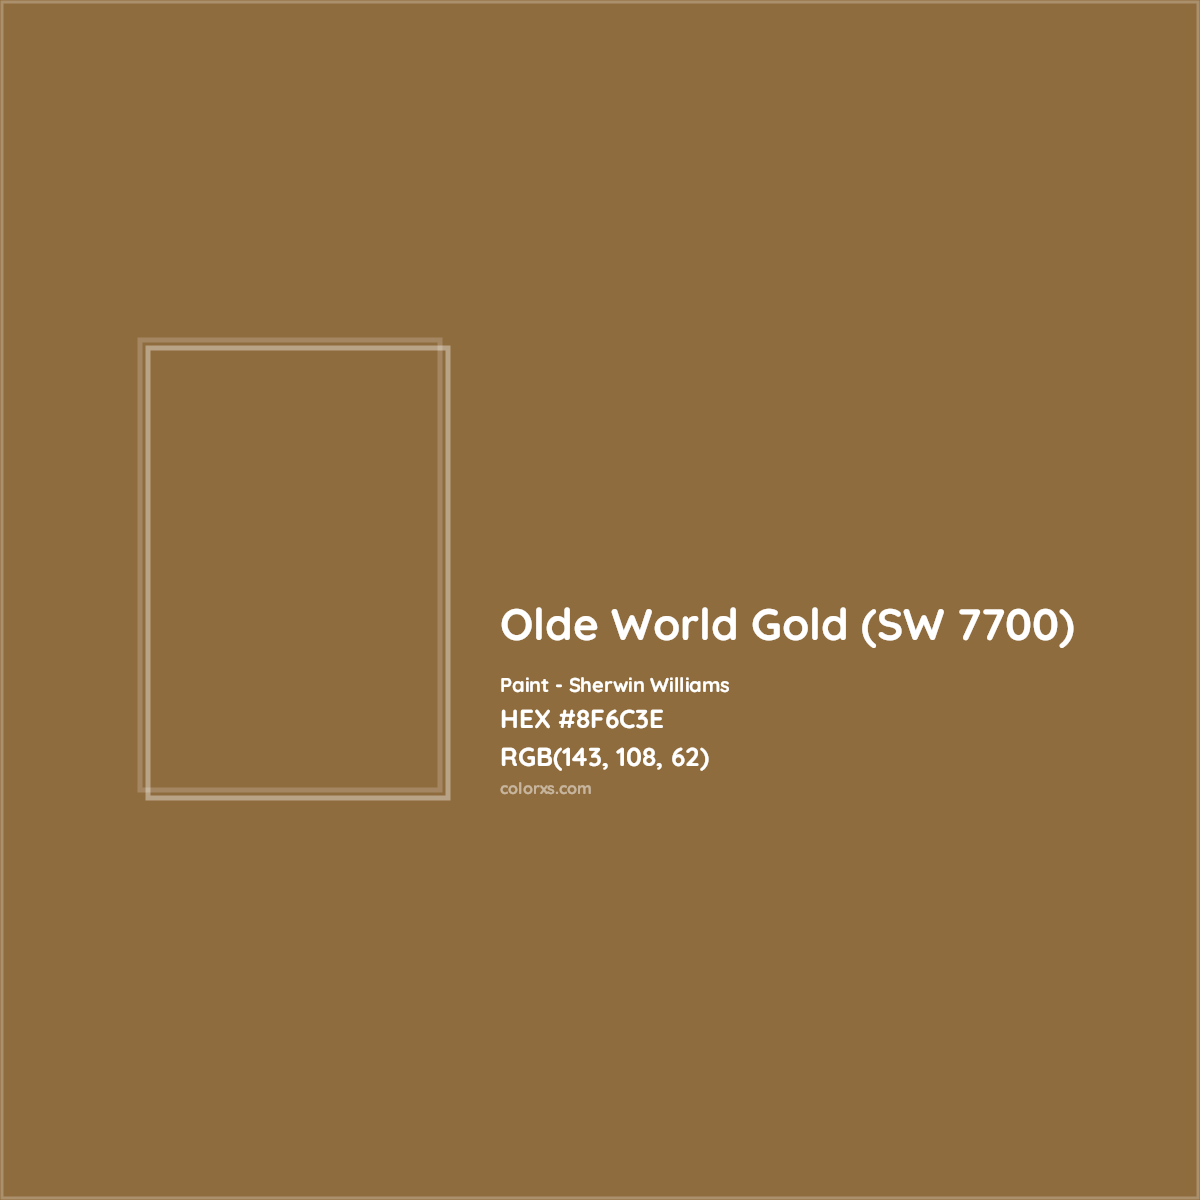 HEX #8F6C3E Olde World Gold (SW 7700) Paint Sherwin Williams - Color Code